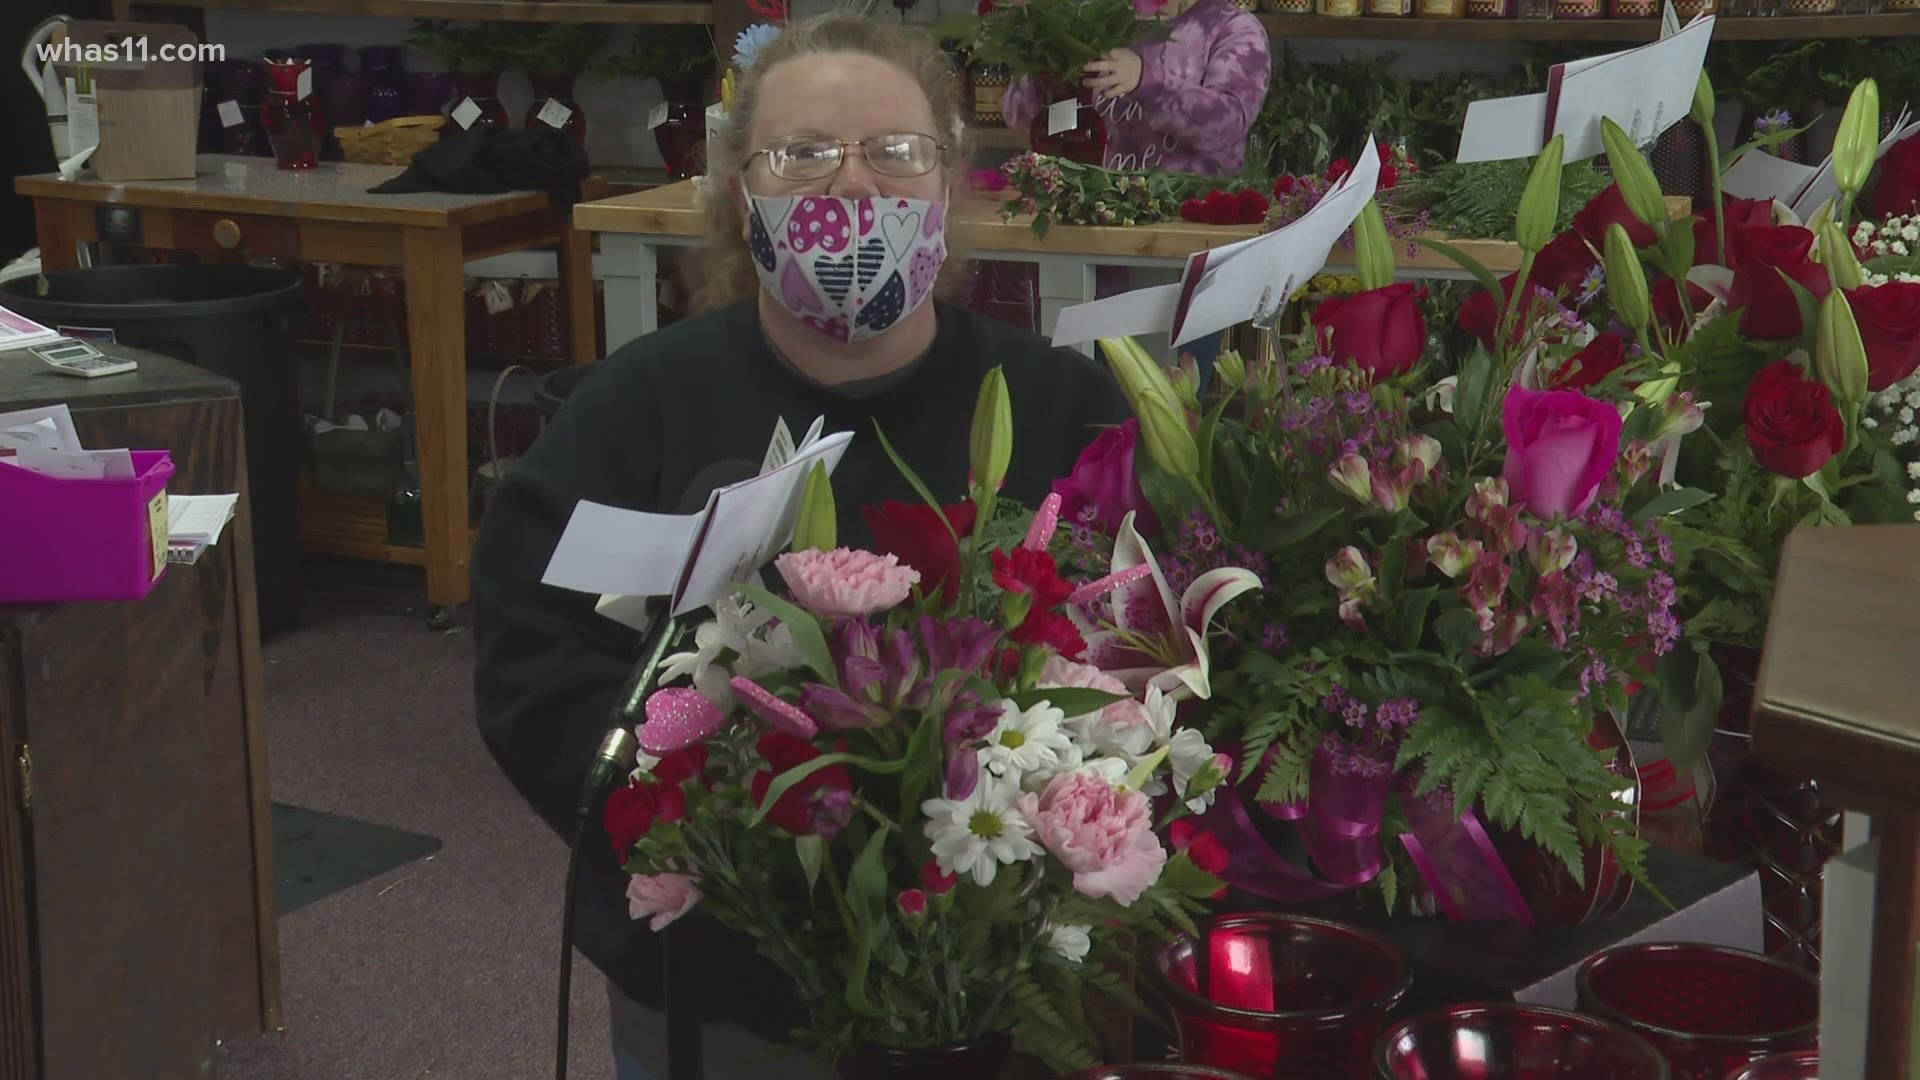 One Elizabethtown flower shop is still getting the job done amid the icy road conditions to make sure Valentine's Day delivers arrive on time.